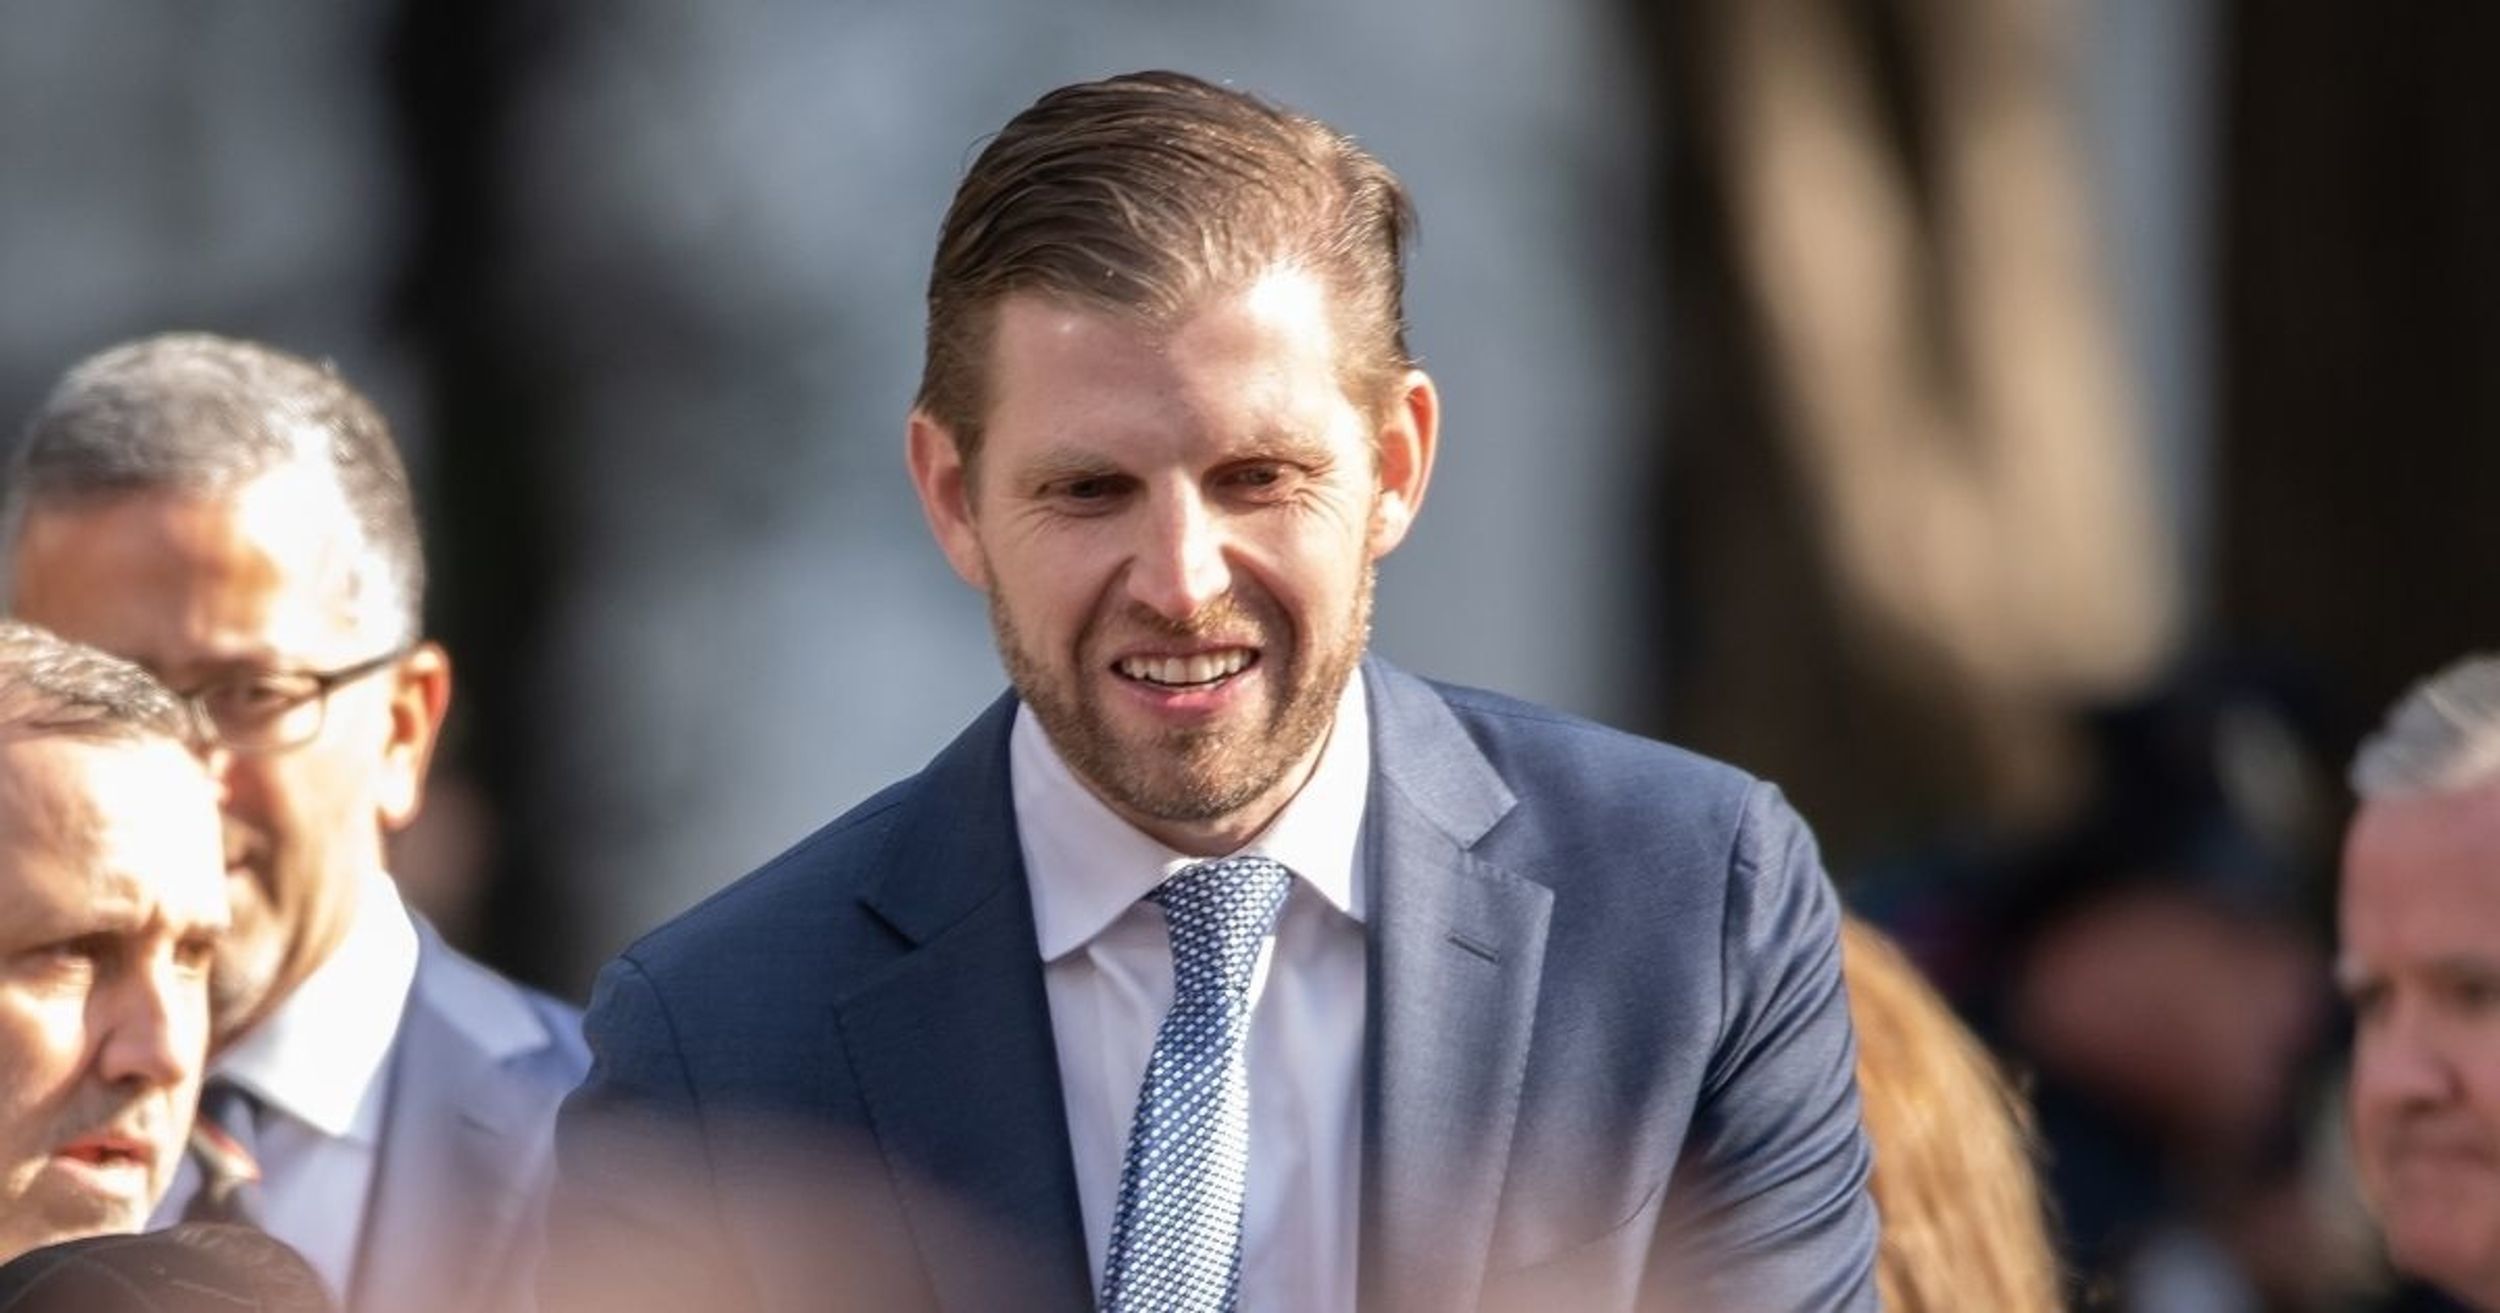 Eric Trump Gets A Blunt Economics Lesson After Boasting About The U.S.'s GDP Growth